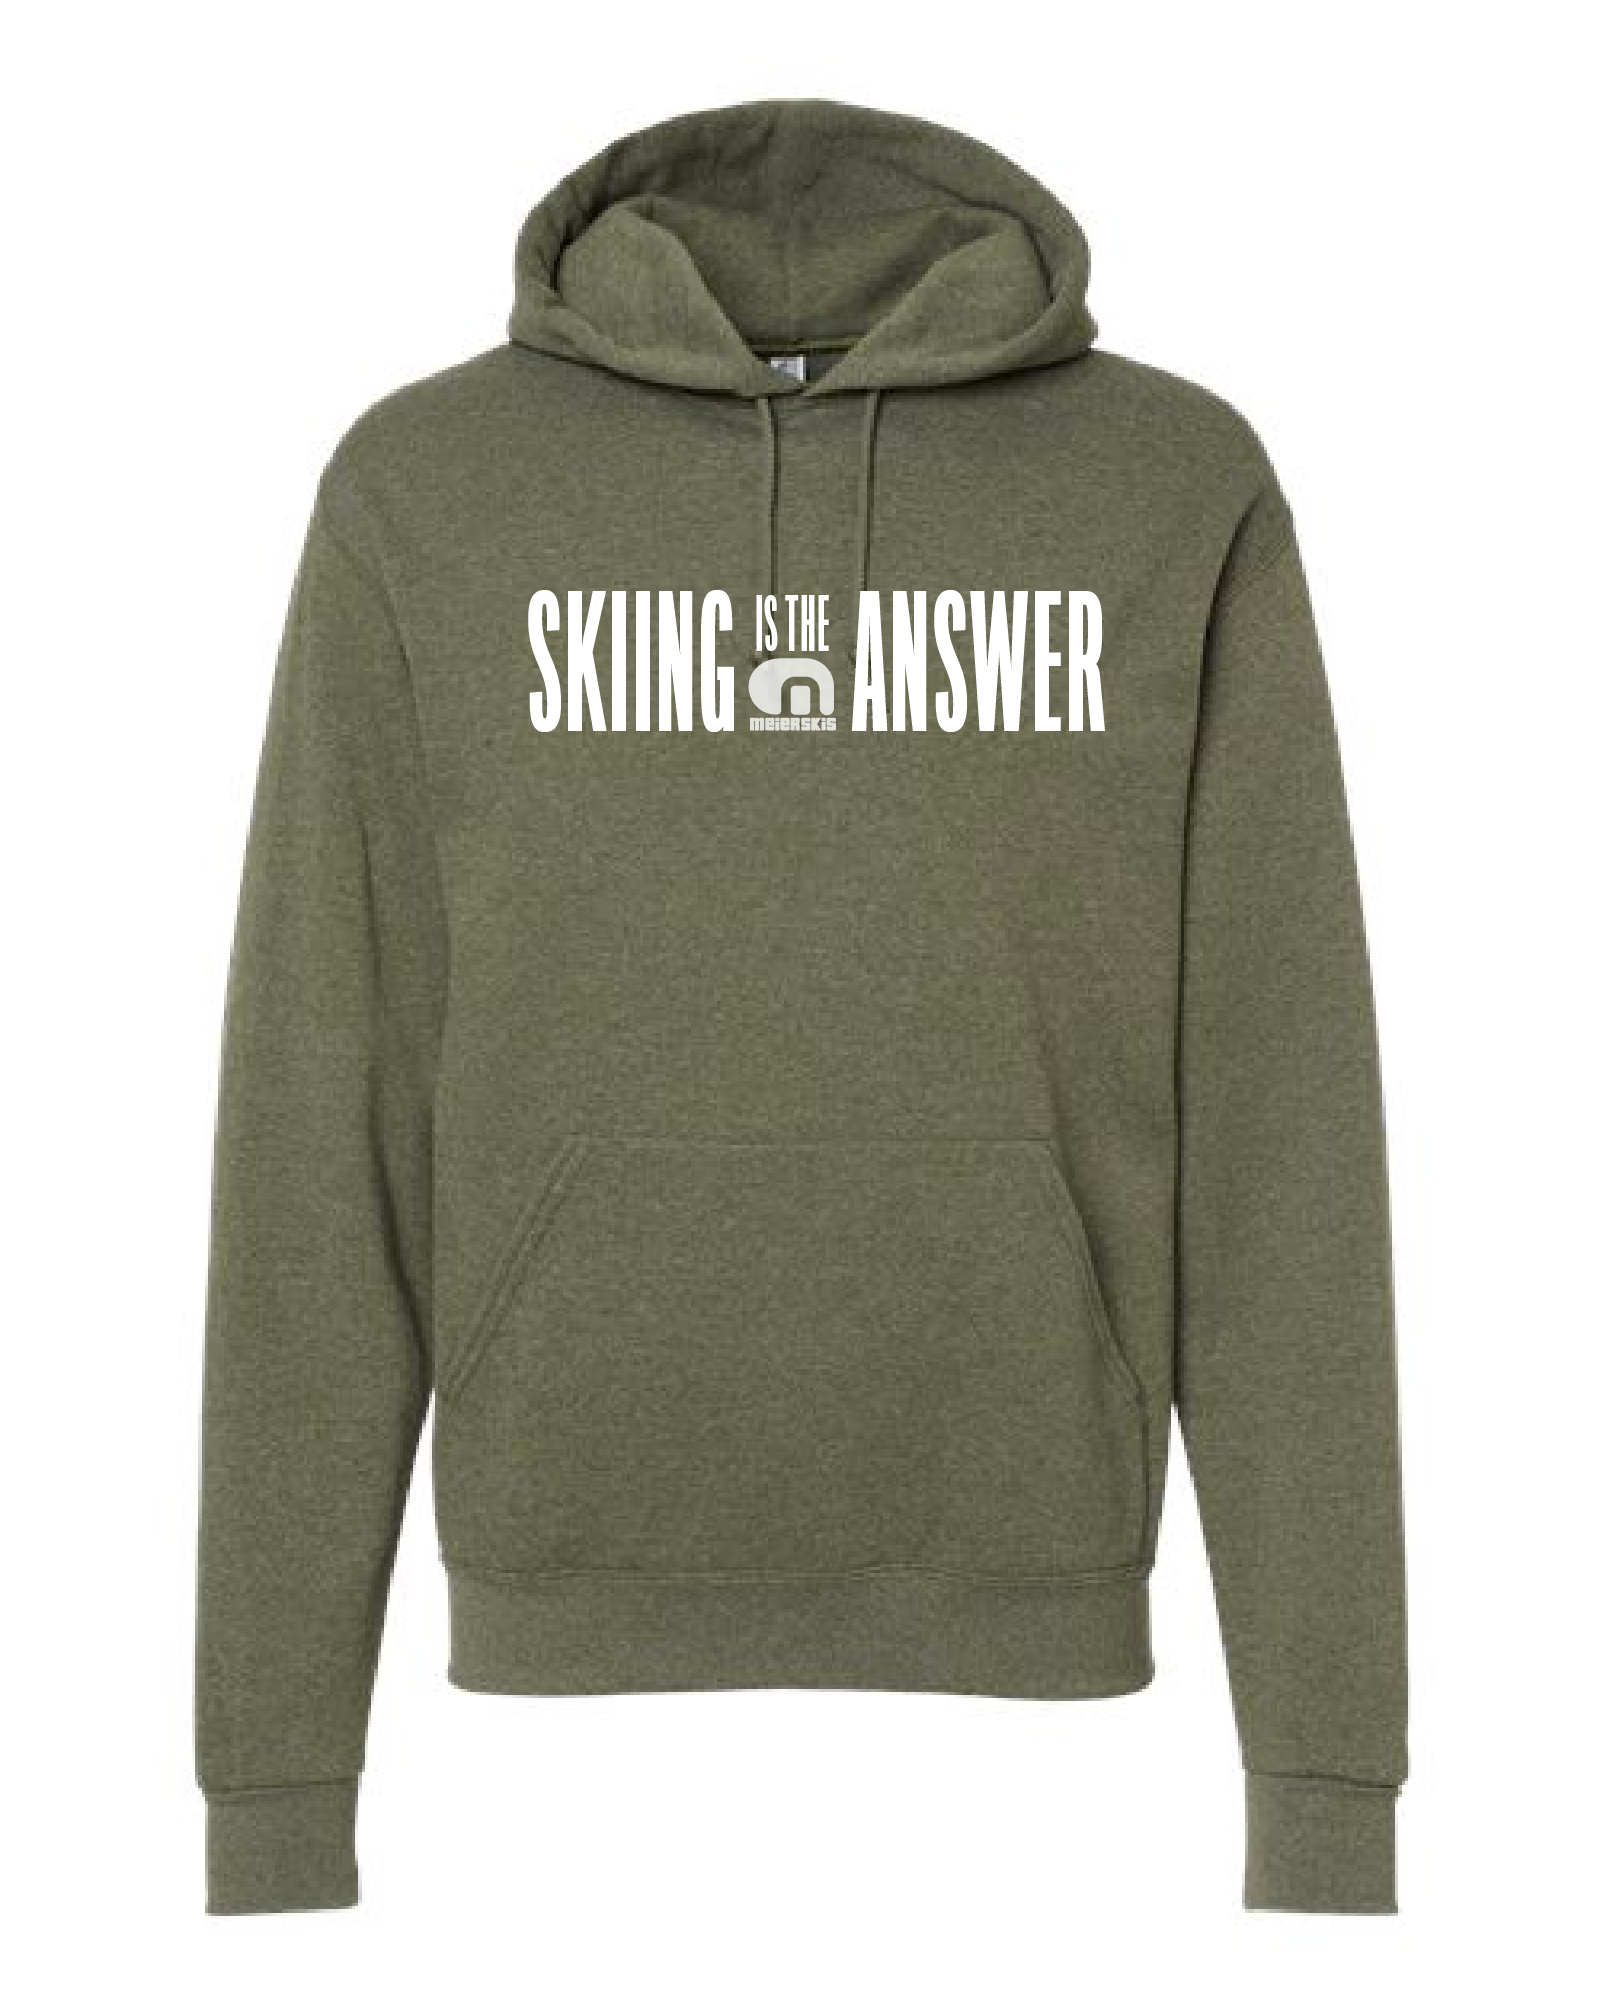 Skiing is the Answer Hoodie